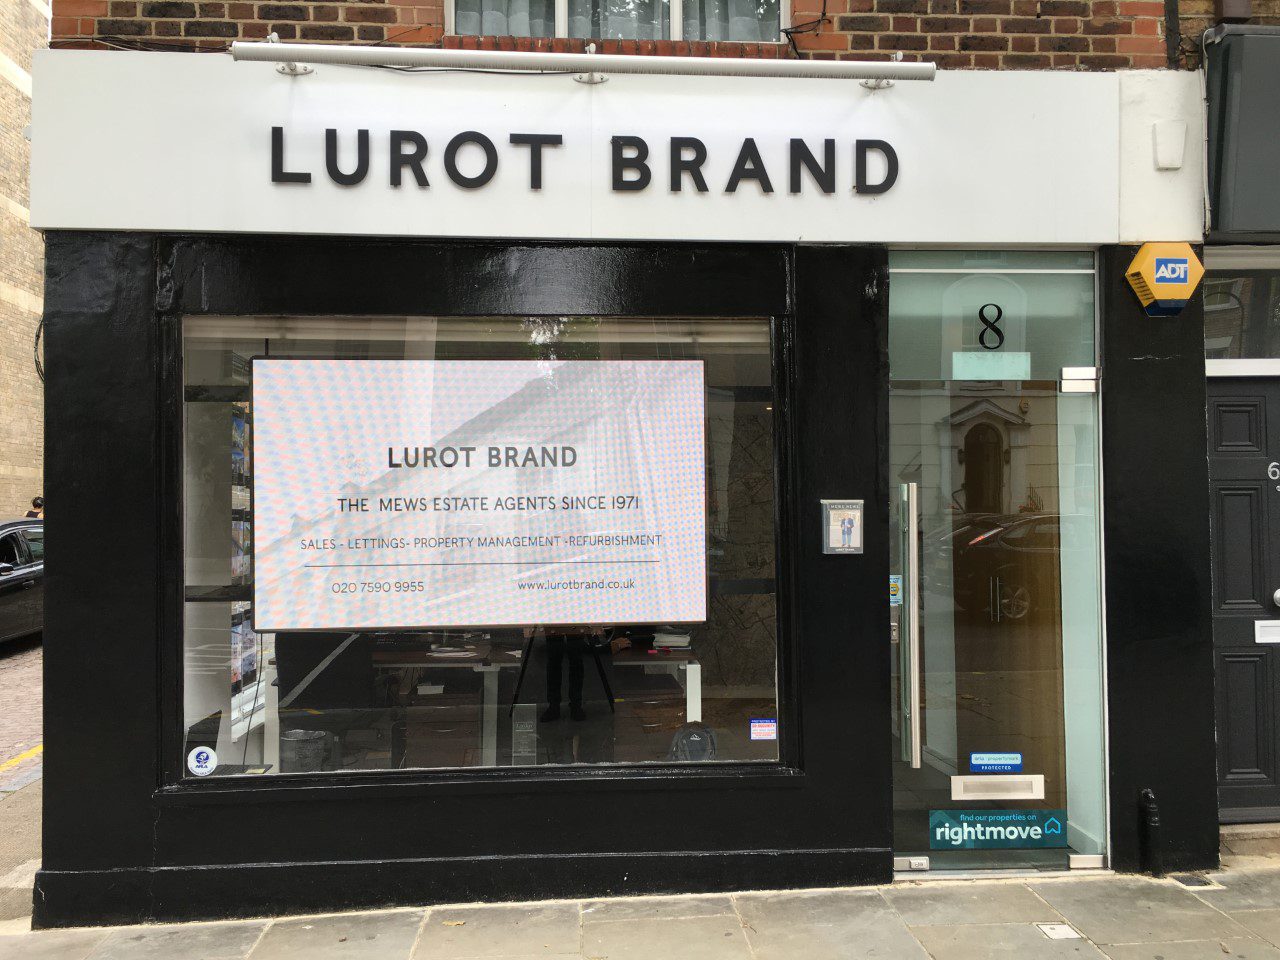 Biggest screen on record in estate agent’s window is now showing in London